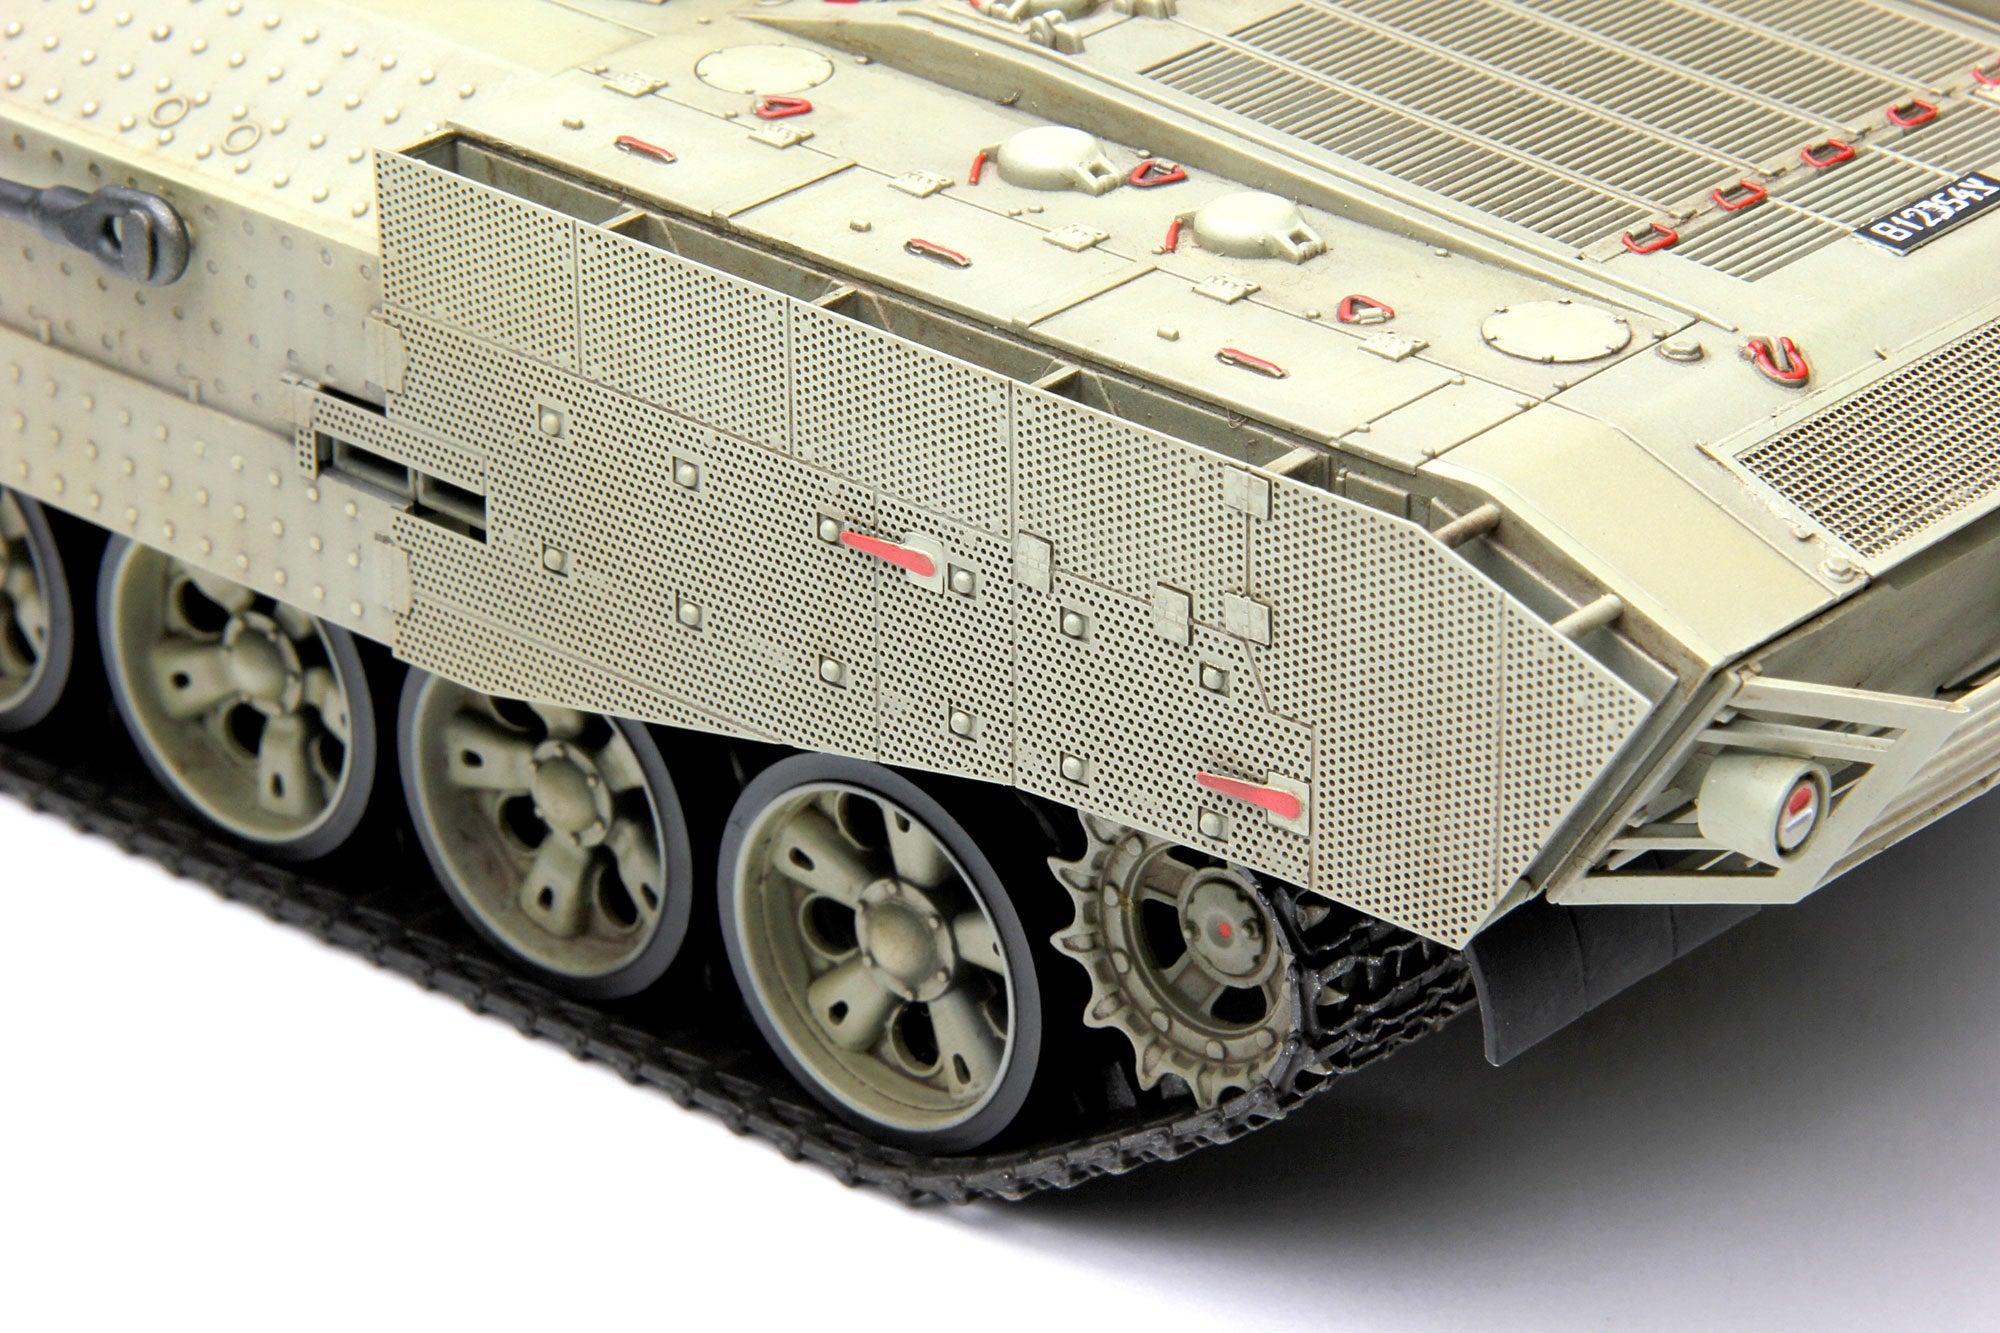 Meng: 1/35 Israeli Heavy Armored Personnel Carrier Achzarit early